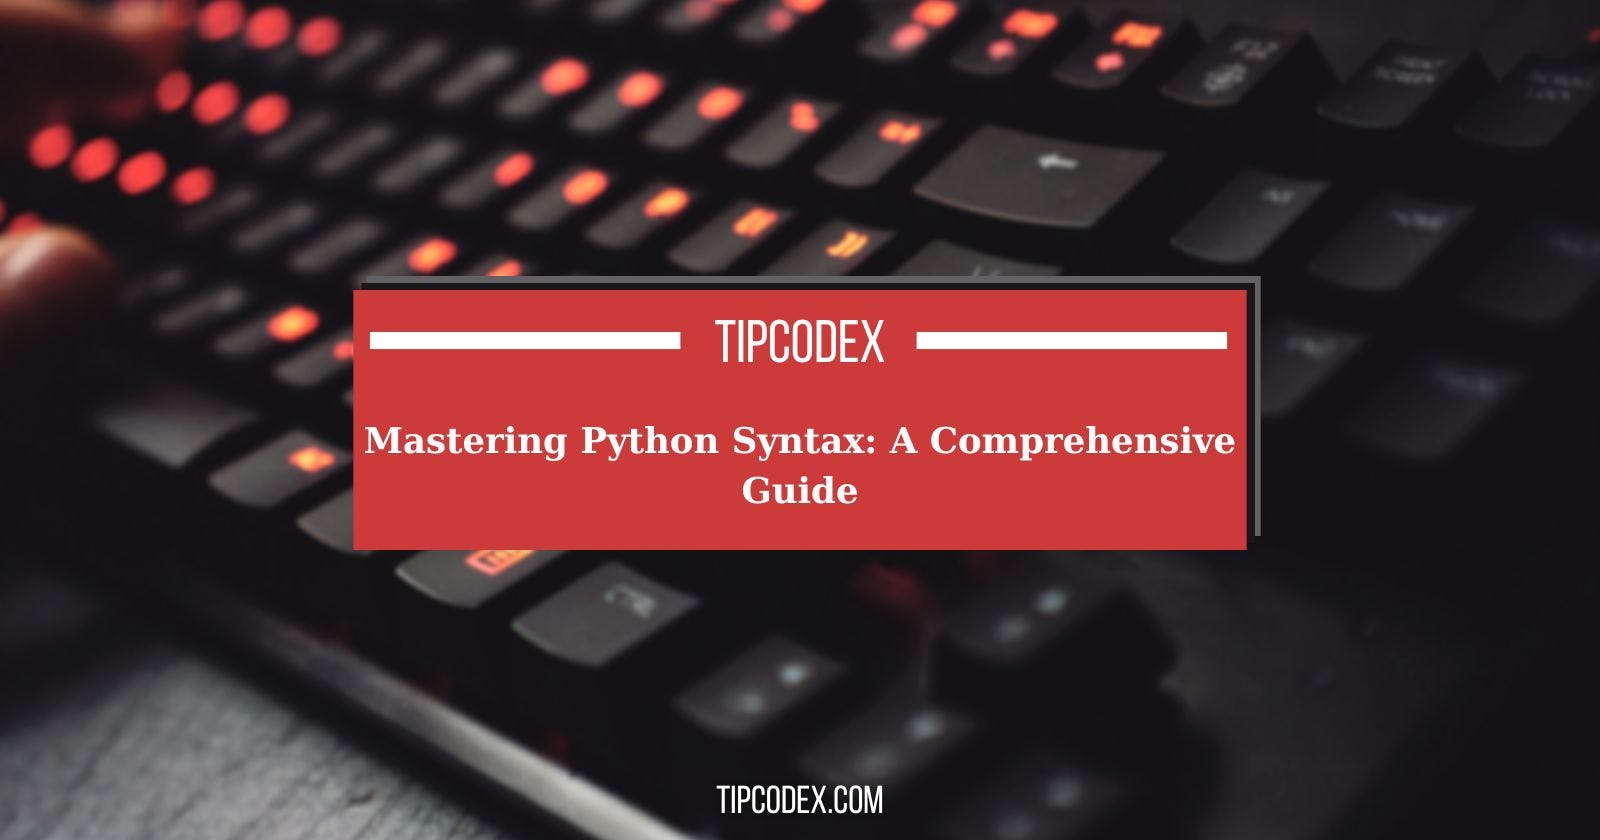 Mastering Python Syntax: A Comprehensive Guide